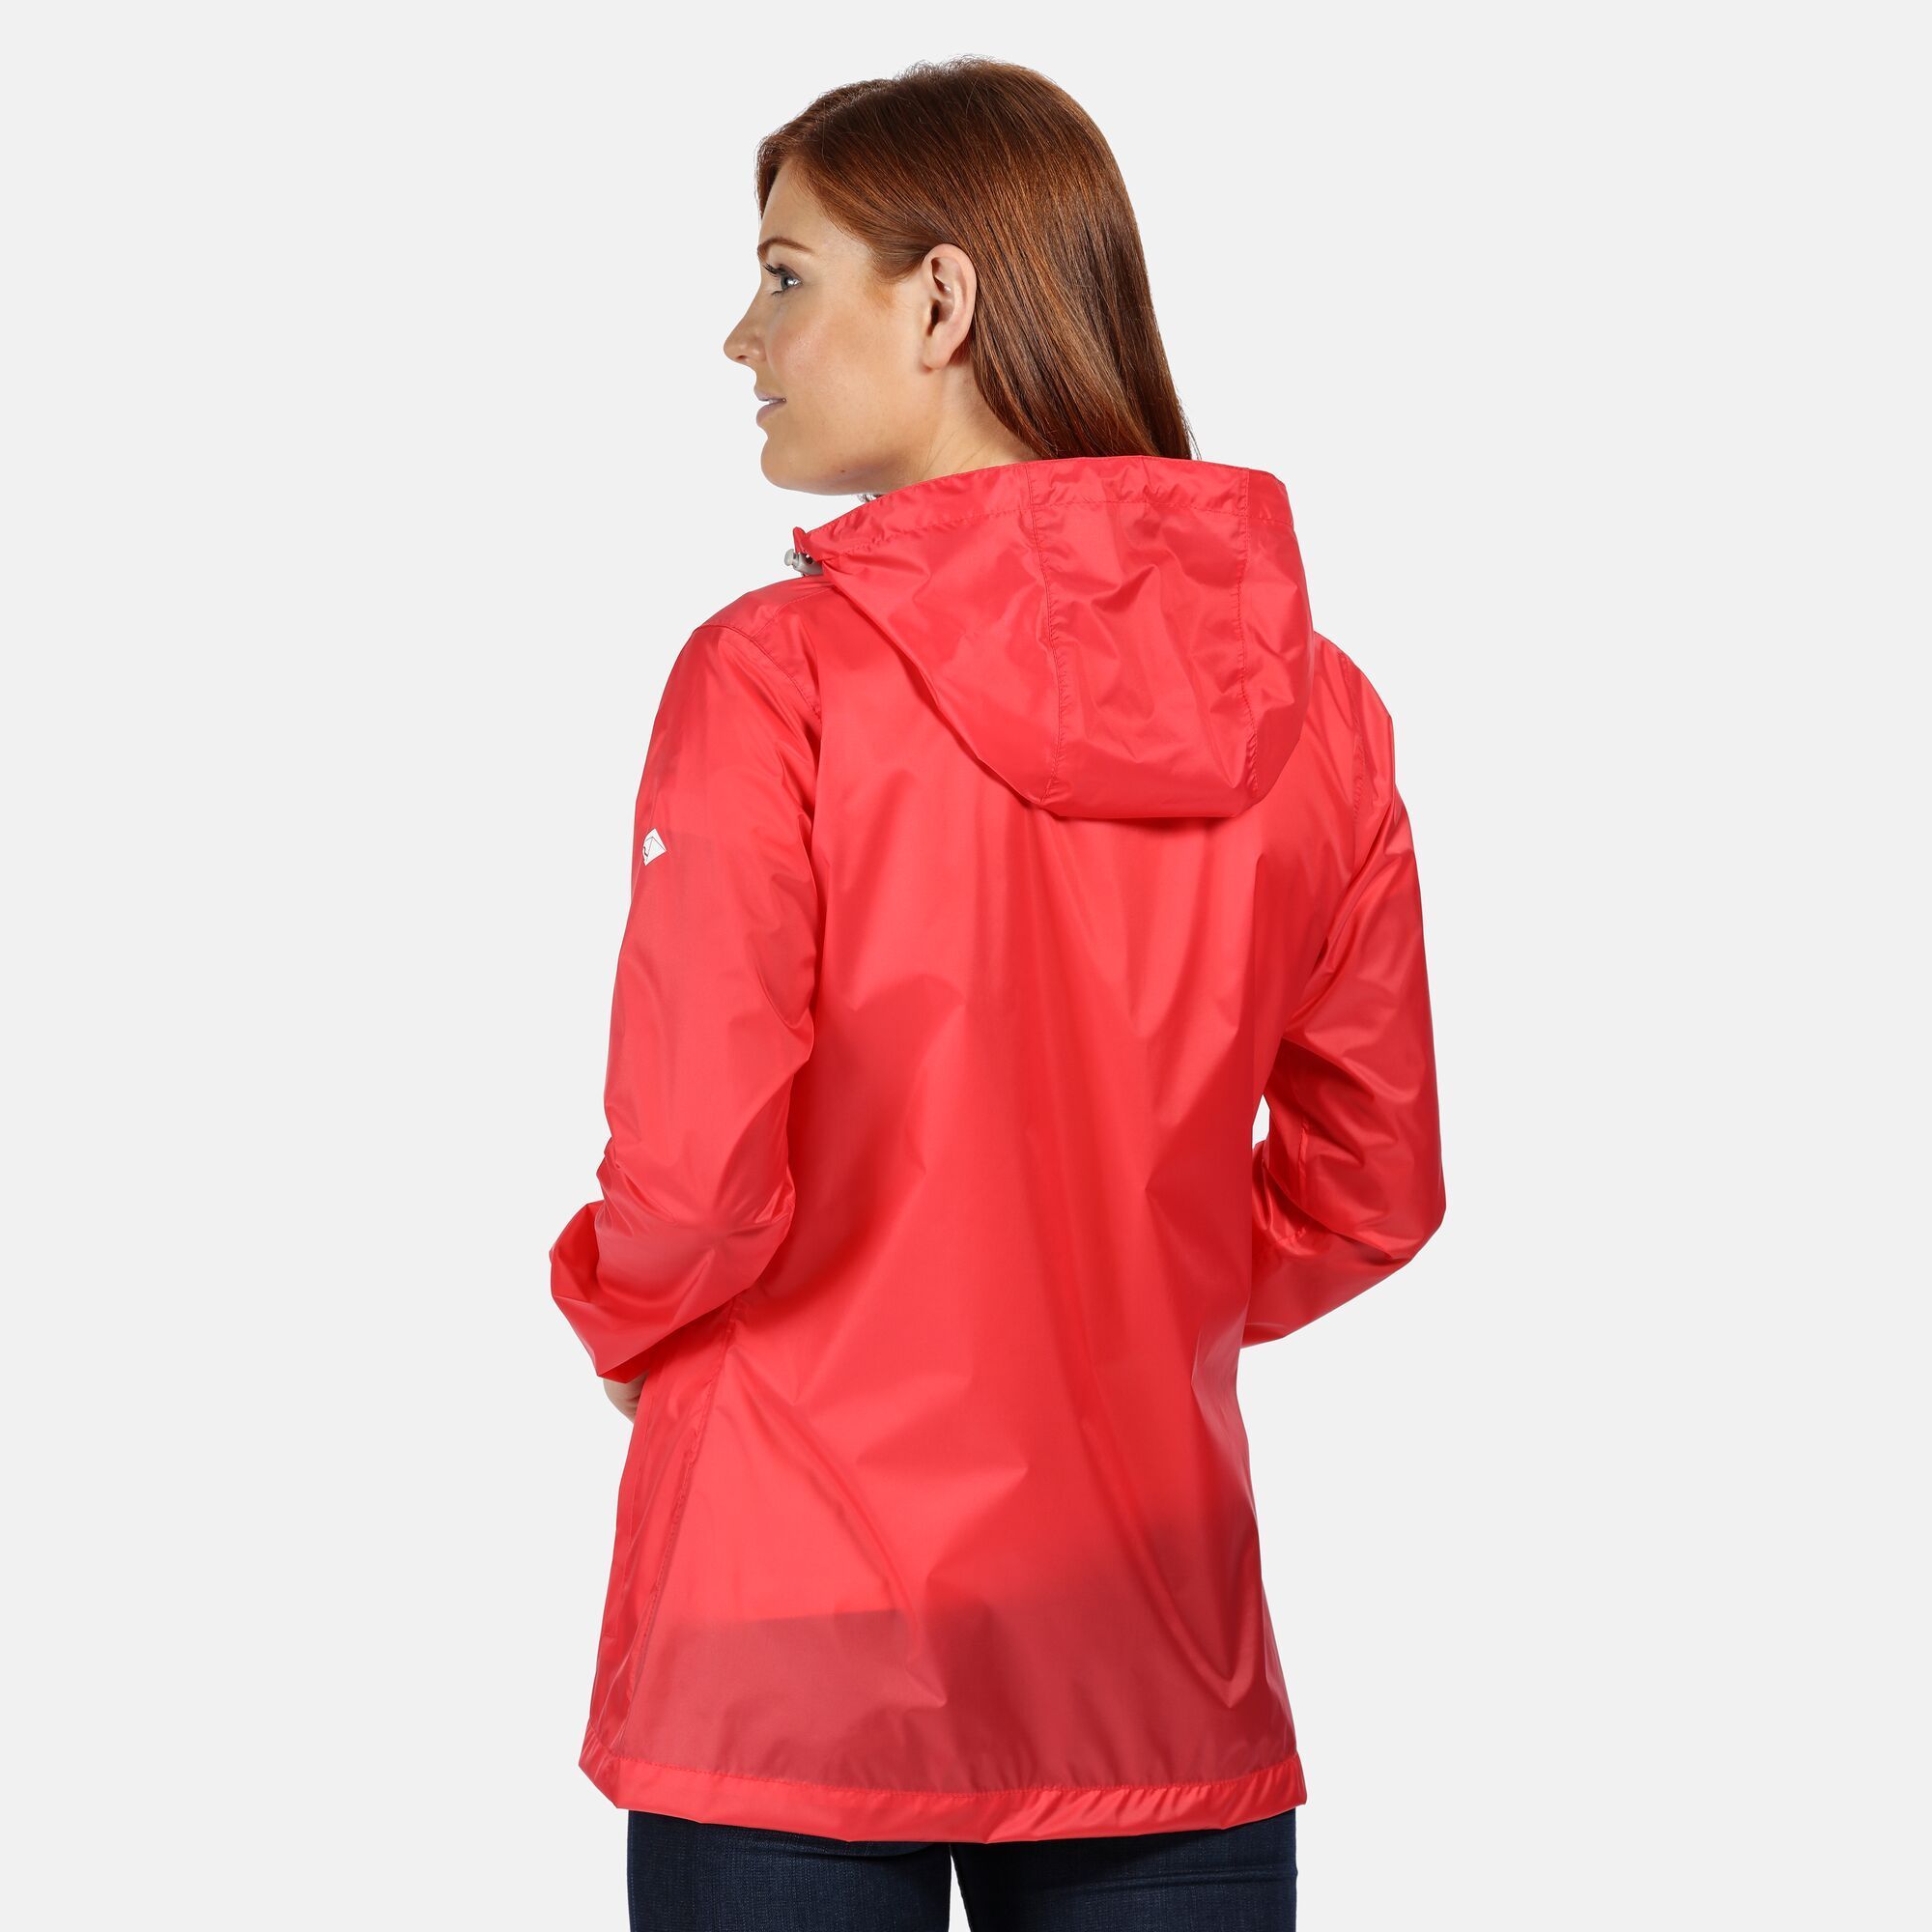 100% Polyamide. Waterproof hooded jacket made from lightweight Isolite 5000 fabric. No lining. 2 lower pockets. Ideal for wet weather or as a light layer. Hand wash.